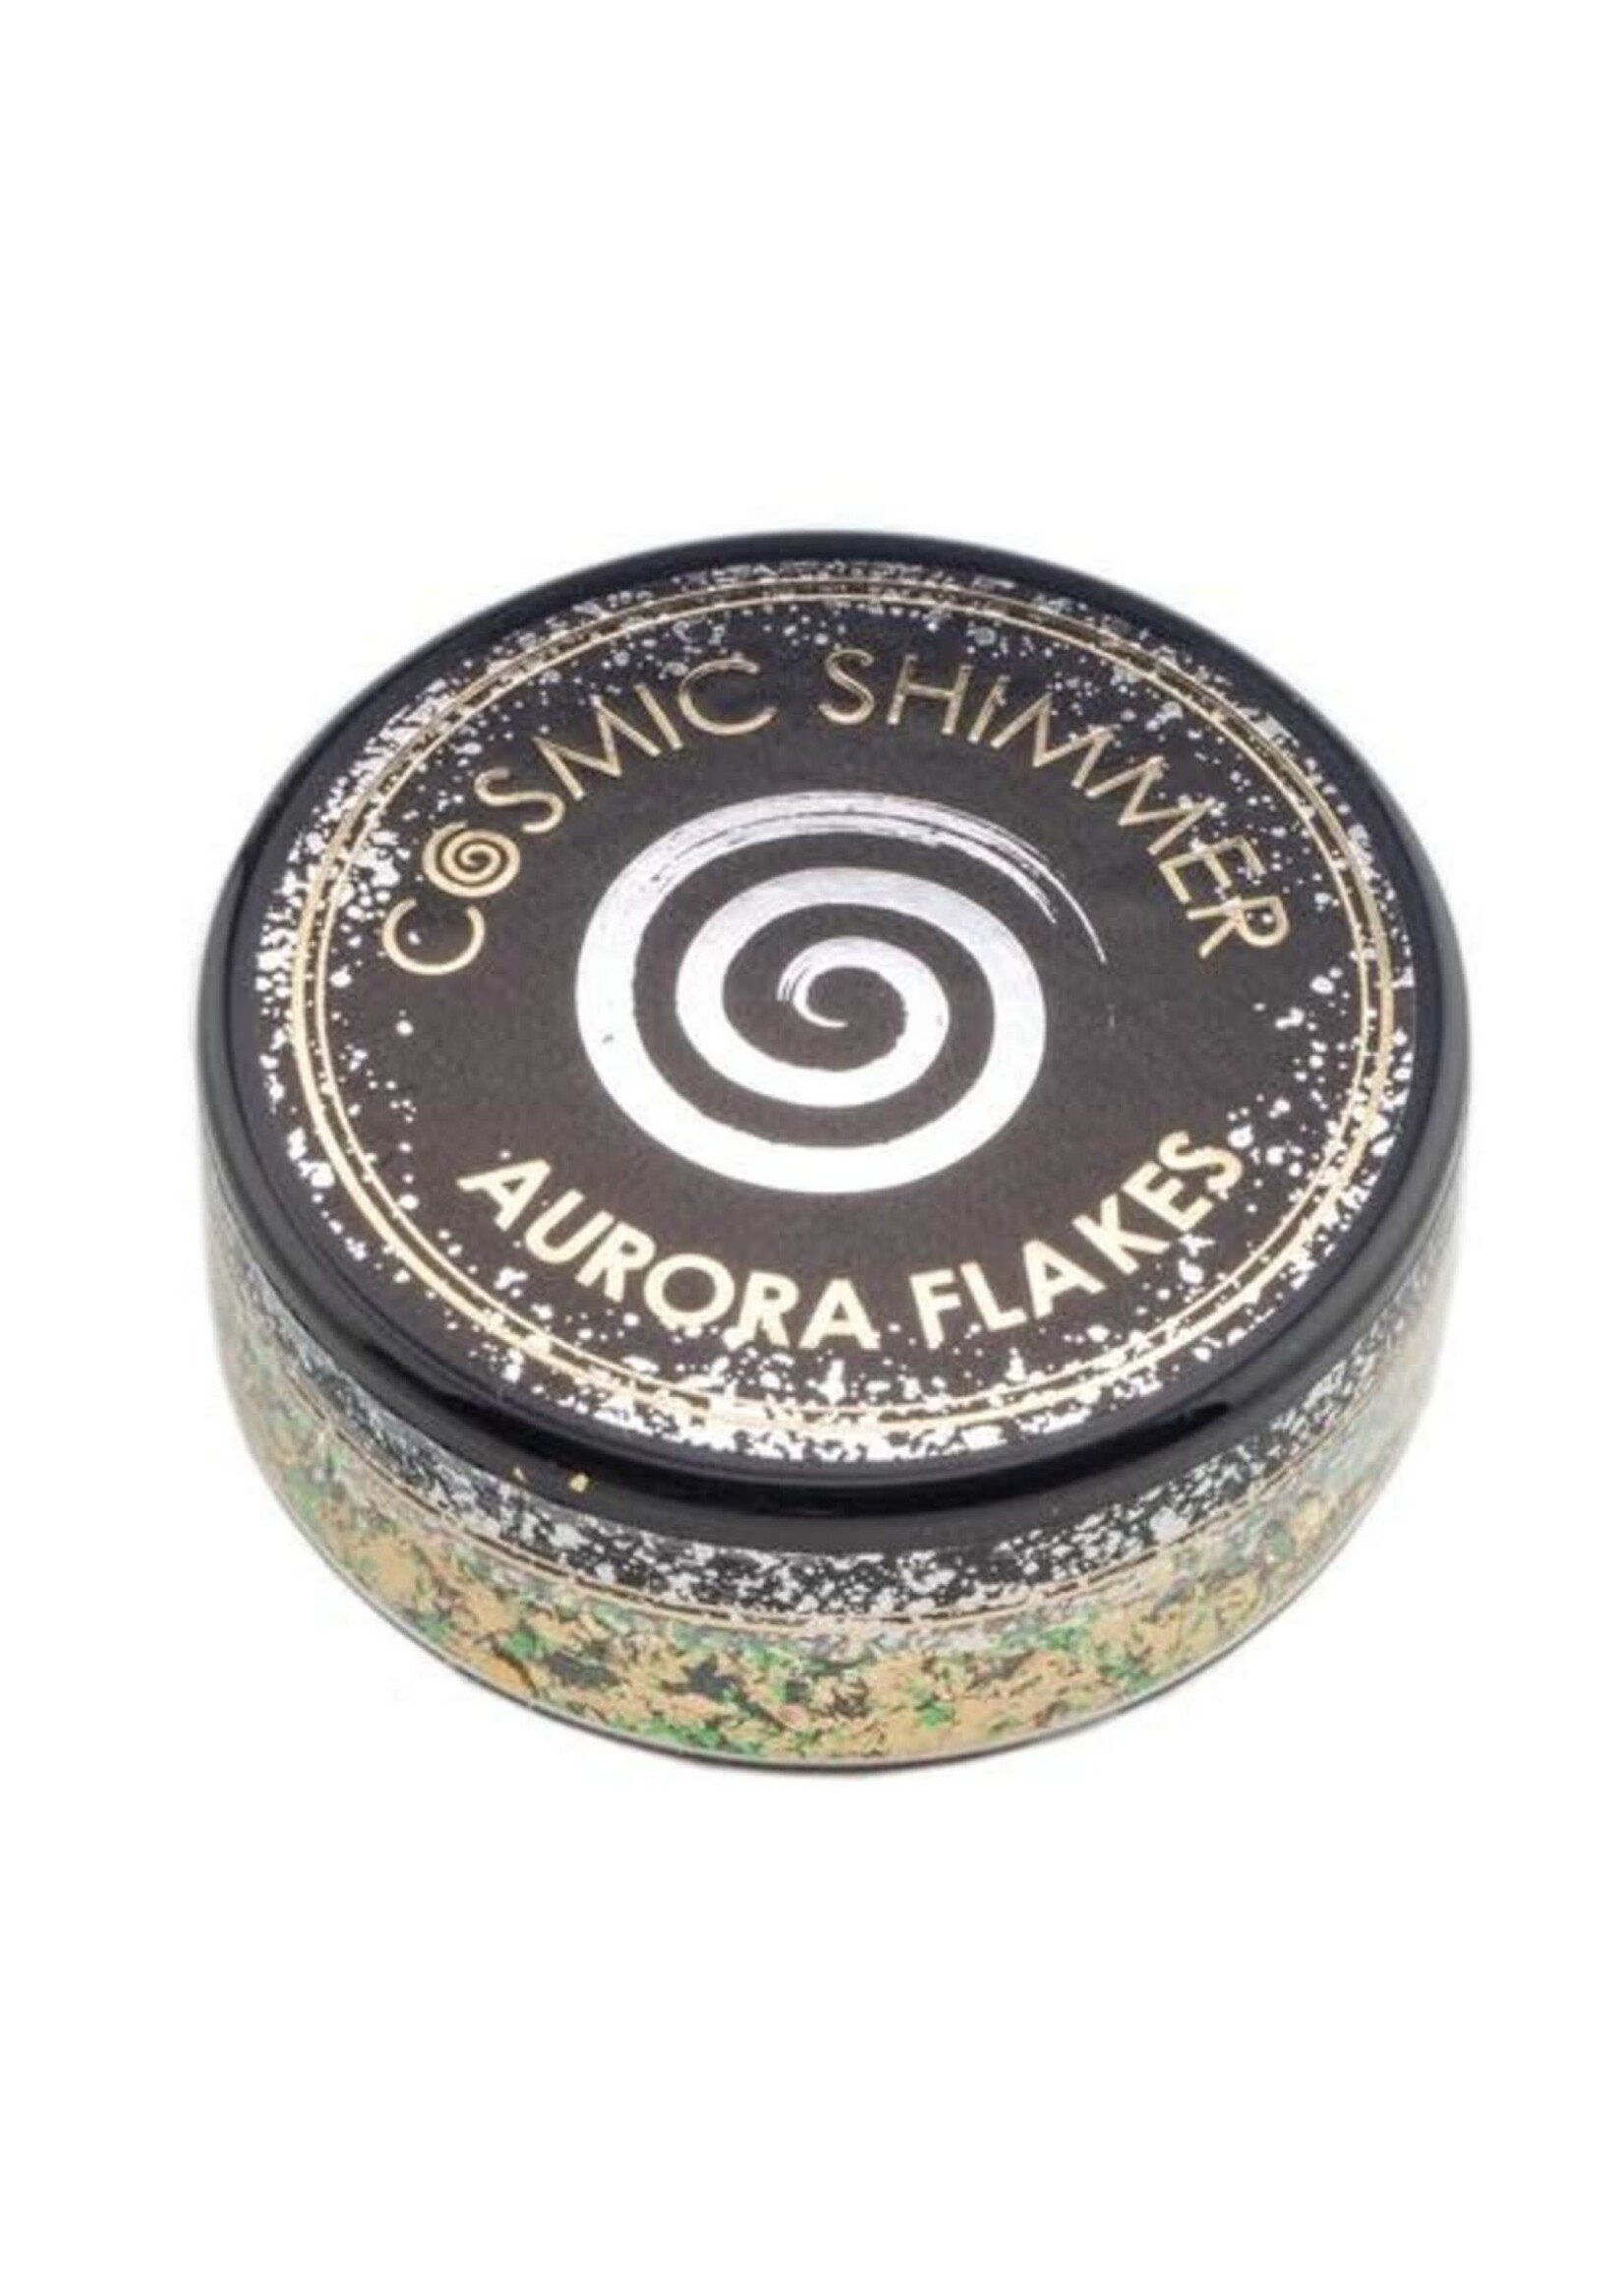 Creative Expressions Cosmic Shimmer Aurora Flakes, Jade Gold